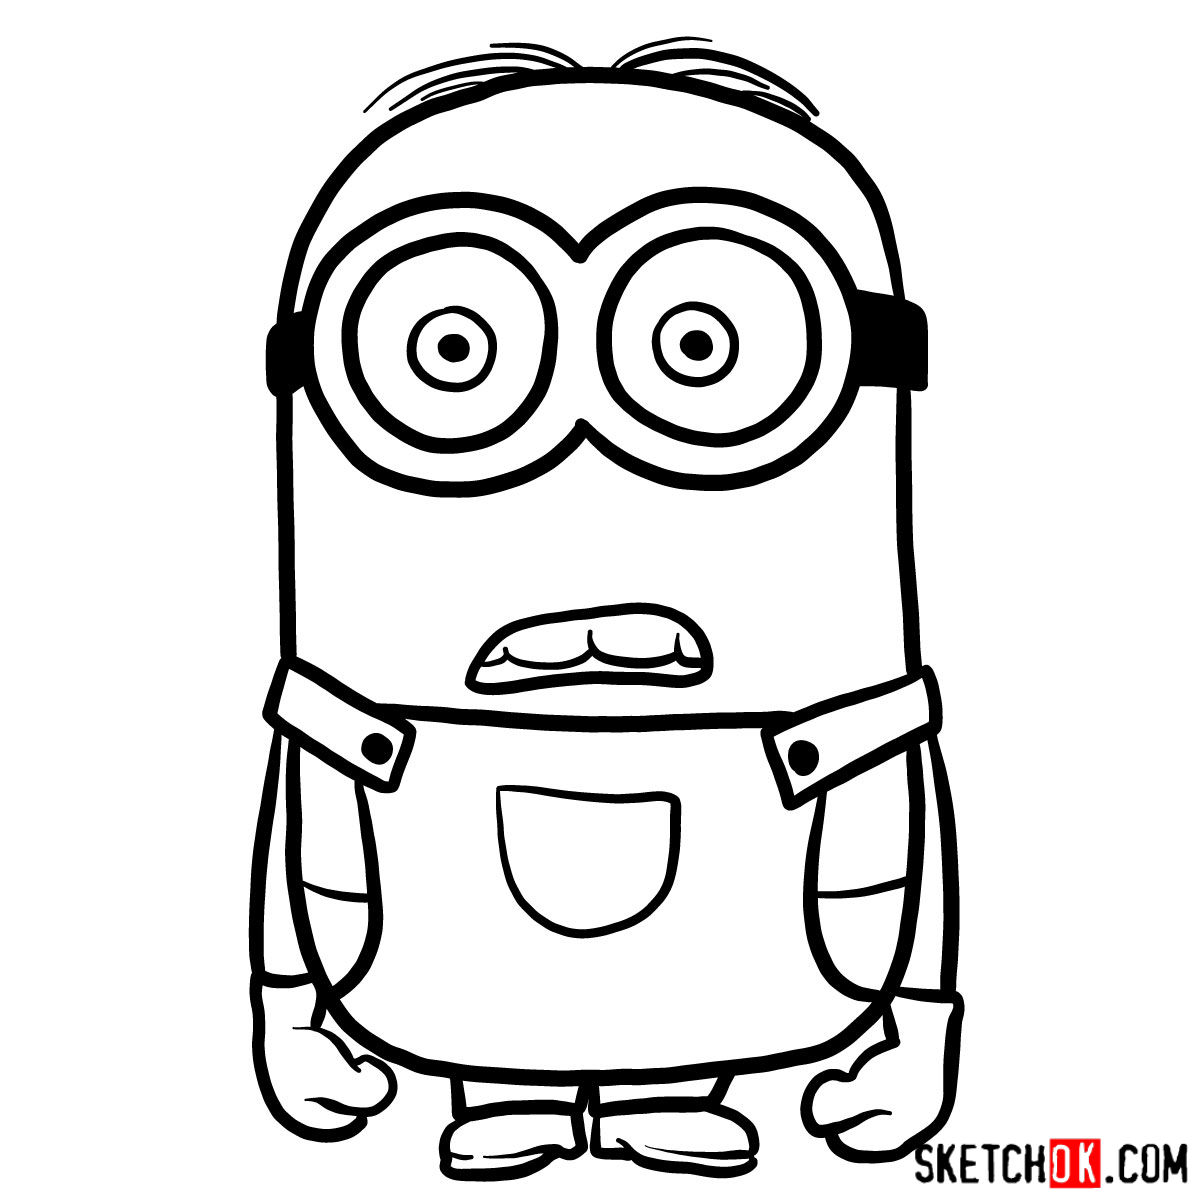 How to draw scared minion Dave - step 10